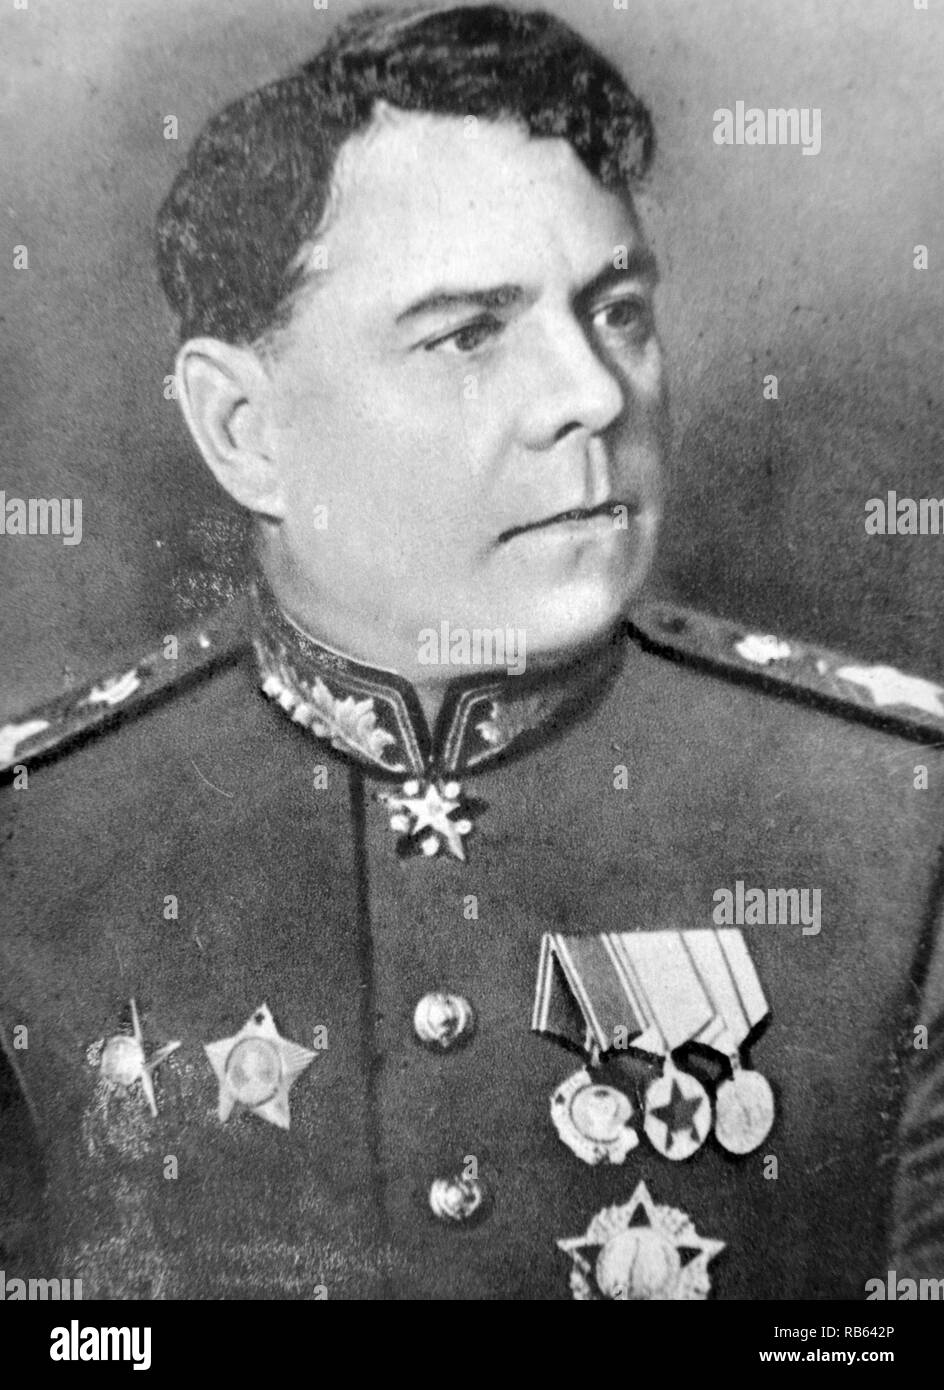 Aleksandr Mikhailovich Vasilevsky (1895 - 1977) was a Russian career officer in the Red Army who was promoted to the rank of Marshal of the Soviet Union in 1943. He was the Chief of the General Staff of the Soviet Armed Forces and Deputy Minister of Defense during World War II, as well as Minister of Defense from 1949 to 1953. As the Chief of the General Staff, Vasilevsky was responsible for planning and coordinating almost all decisive Soviet offensives in World War II, from the Stalingrad counteroffensive to the assault on East Prussia and Konigsberg. Stock Photo